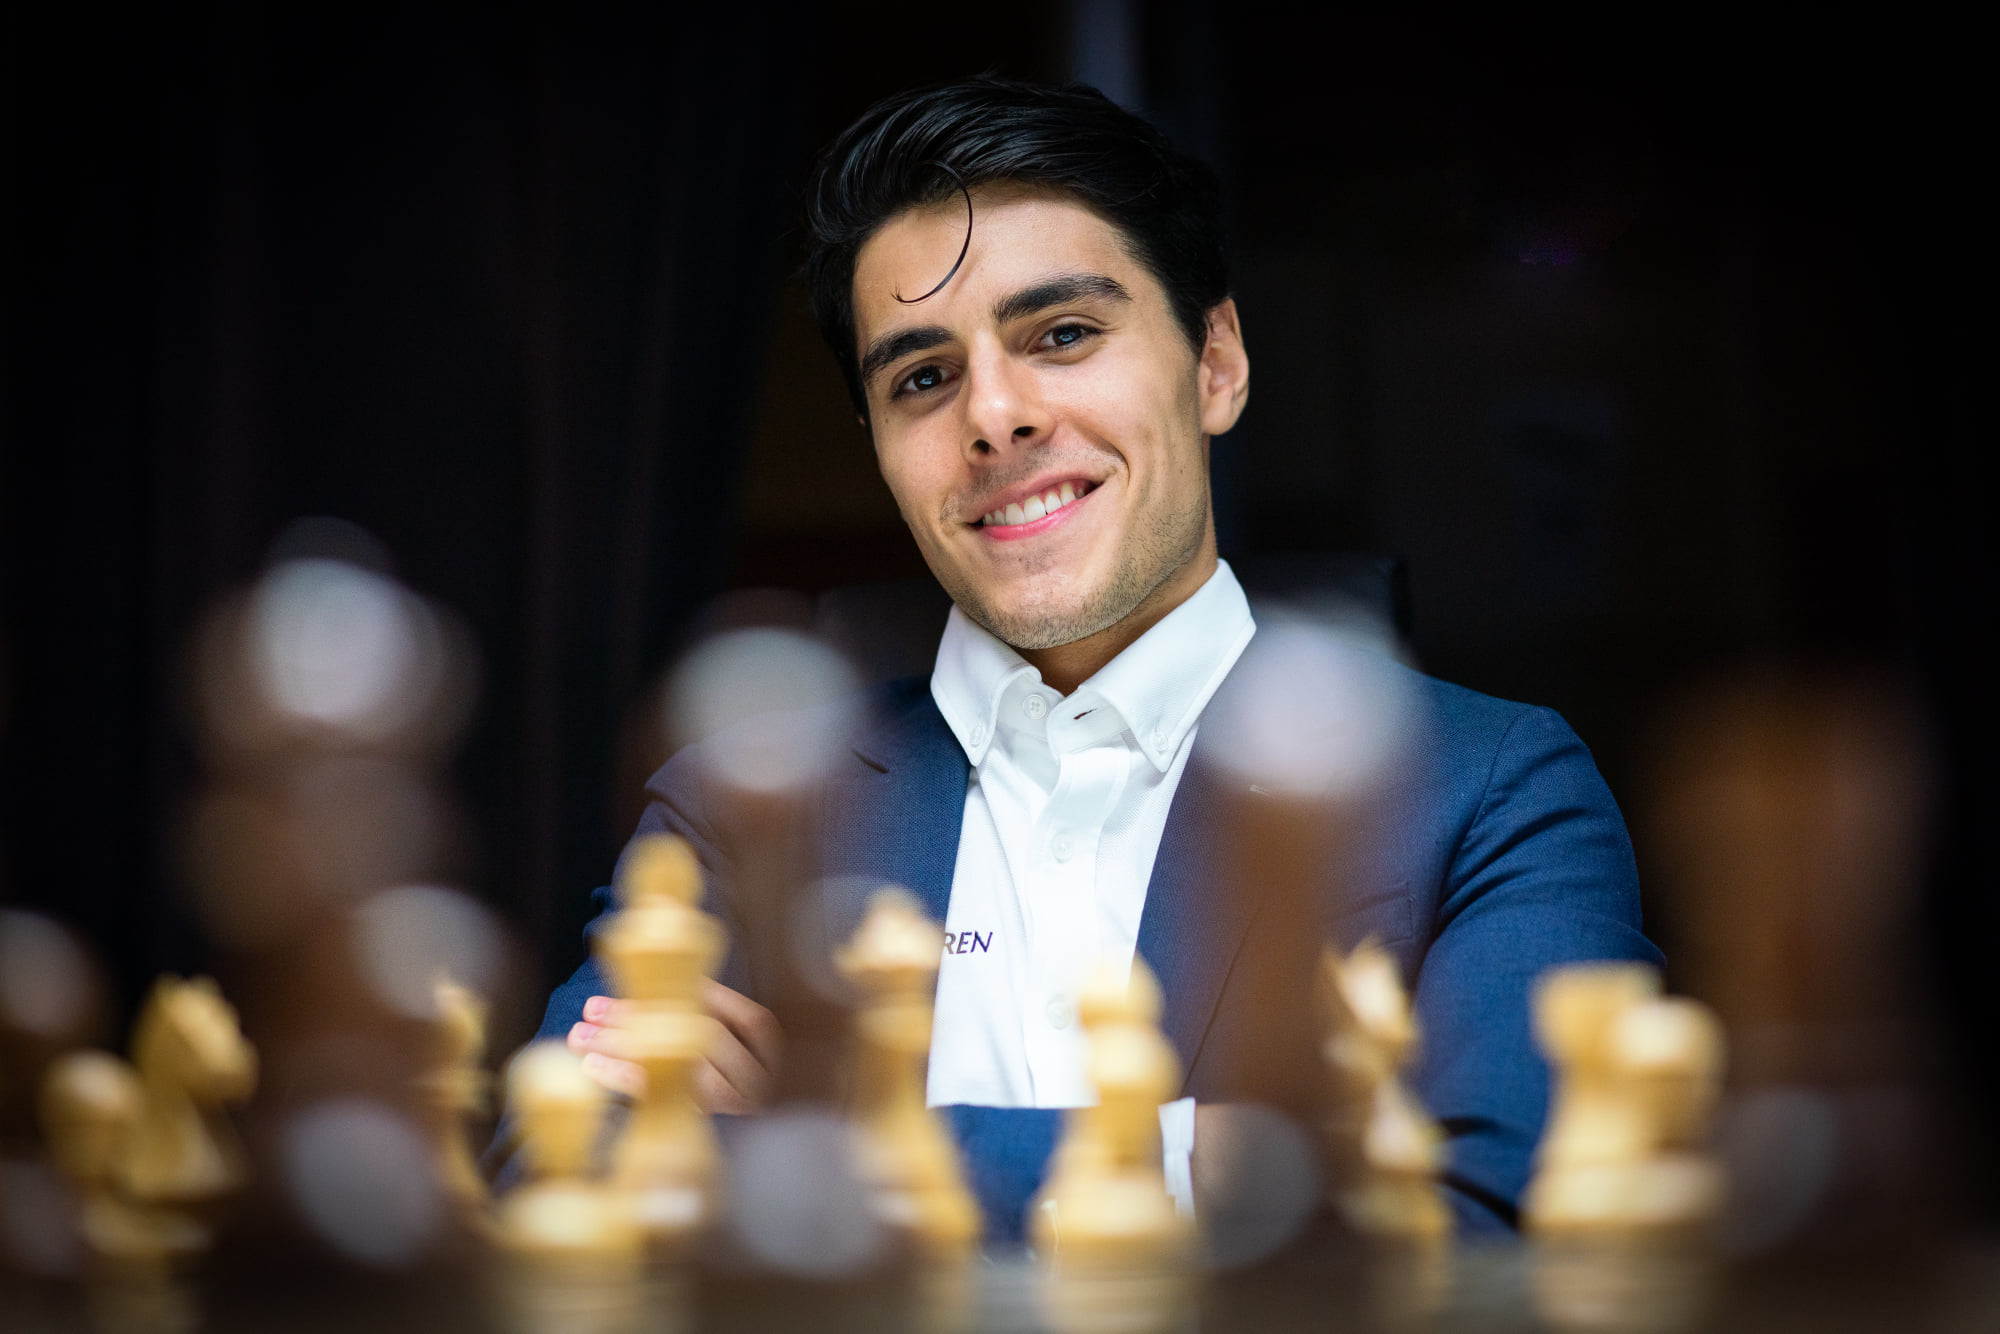 chess24 - Magnus Carlsen finally loses a classical game of